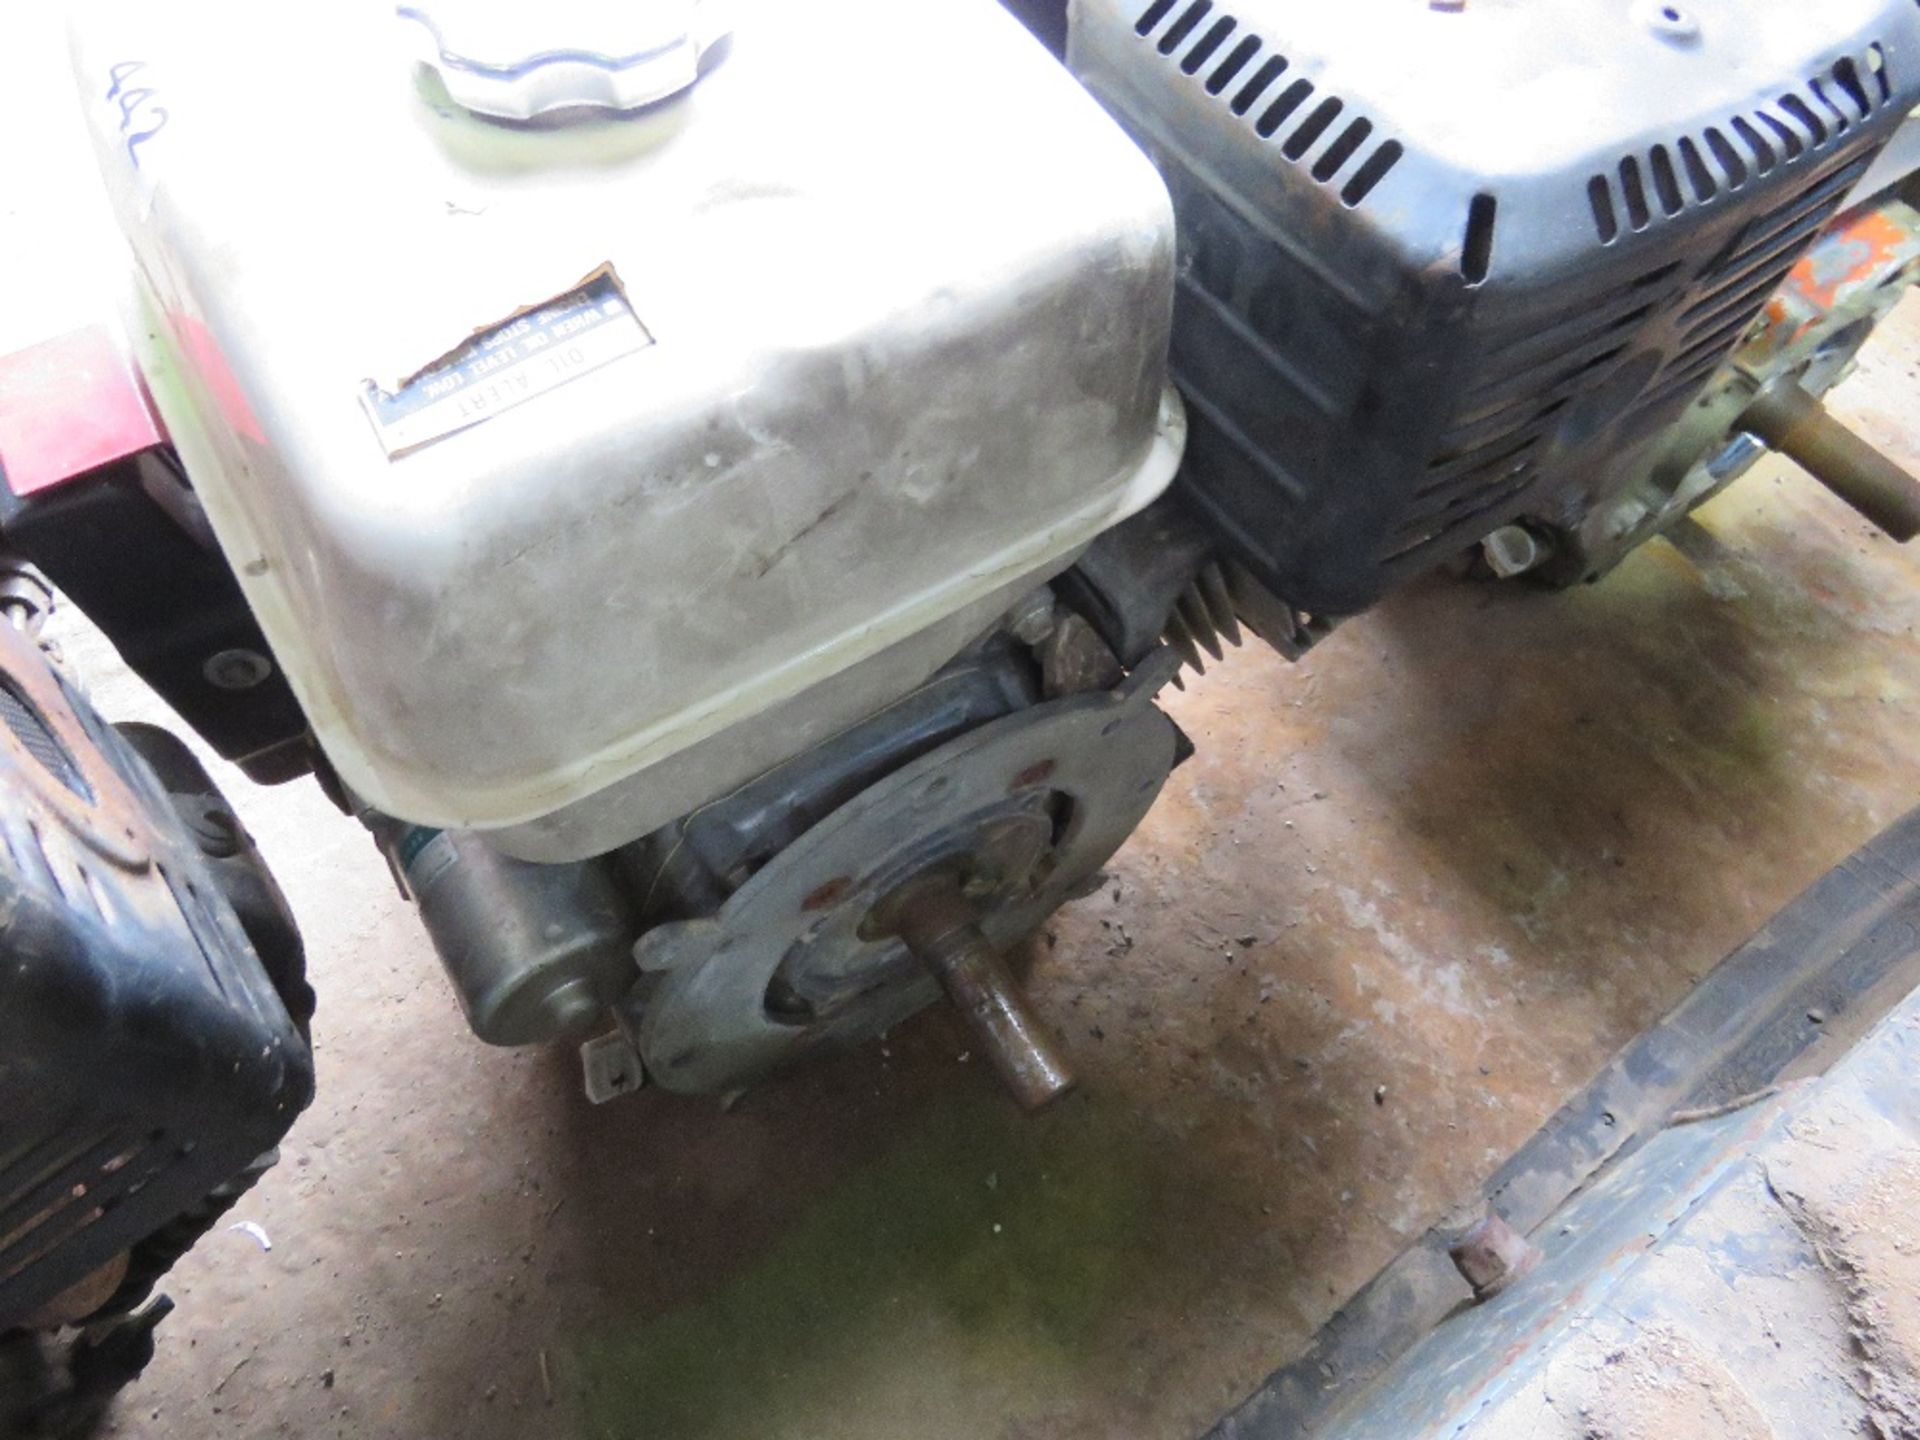 HONDA GX390 ELECTRIC START PETROL ENGINE, CONDITION UNKNOWN. - Image 3 of 3